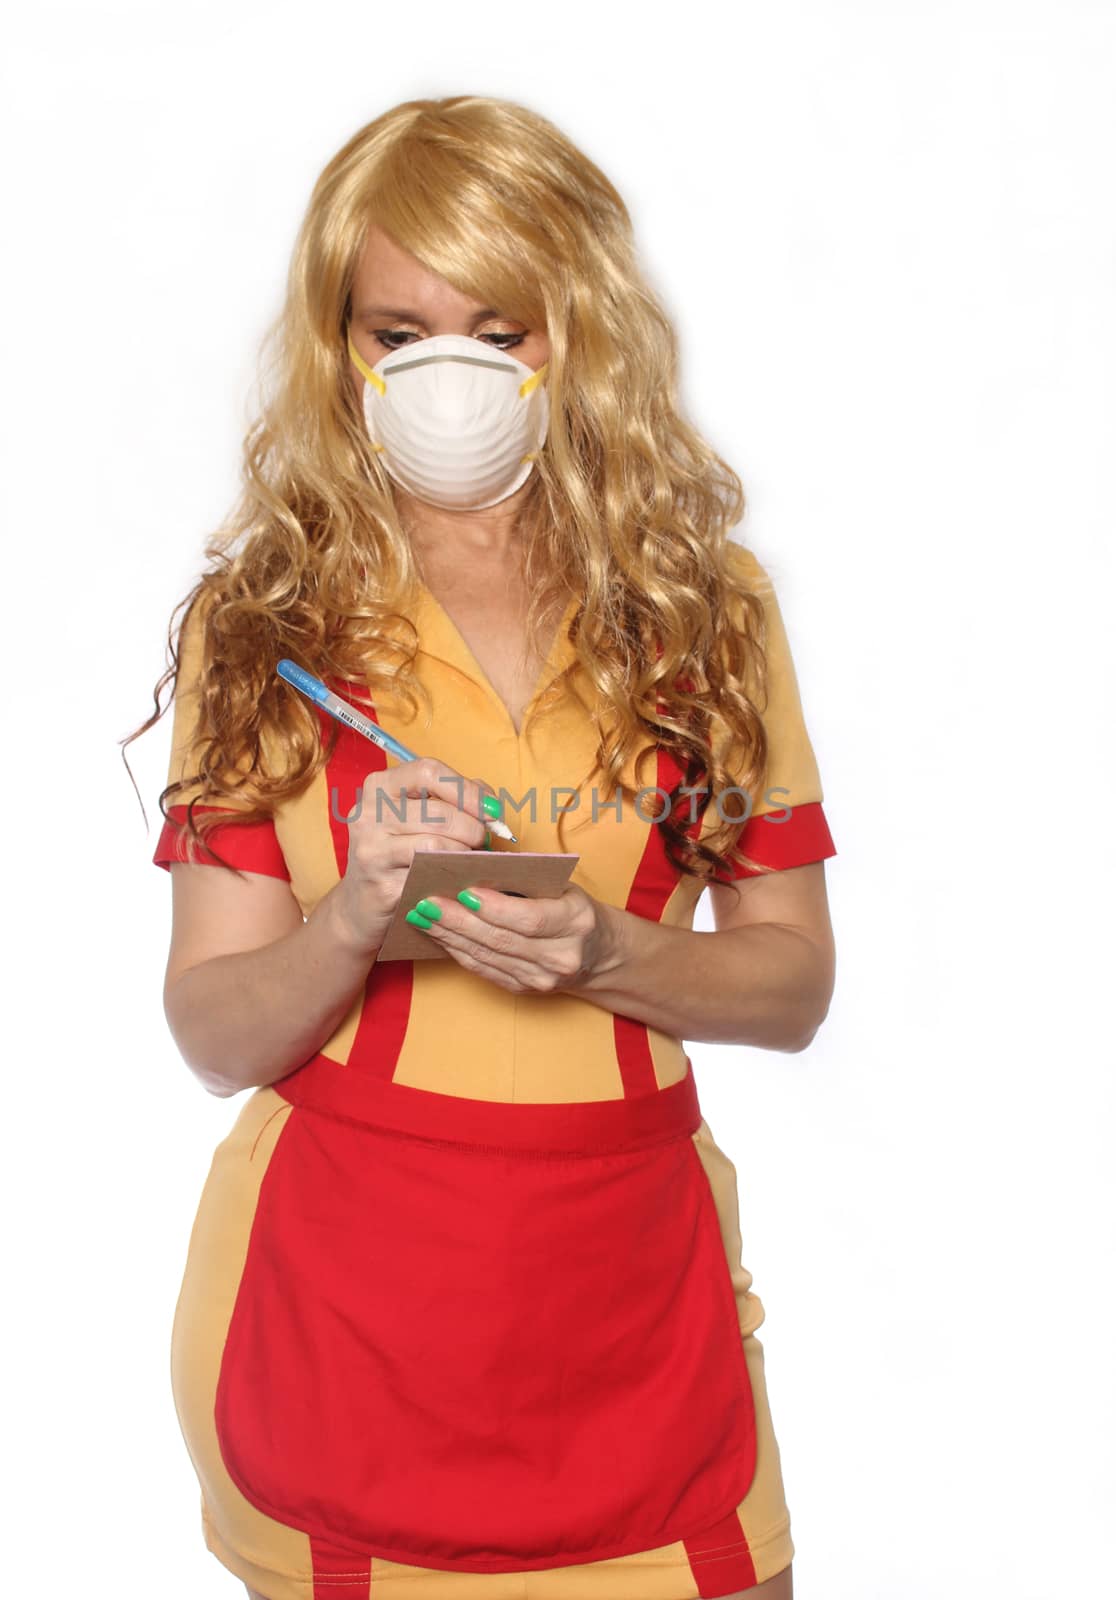 Restaurant and Bar Waitress Wearing Face Mask To Prevent illness Isolated on White Background